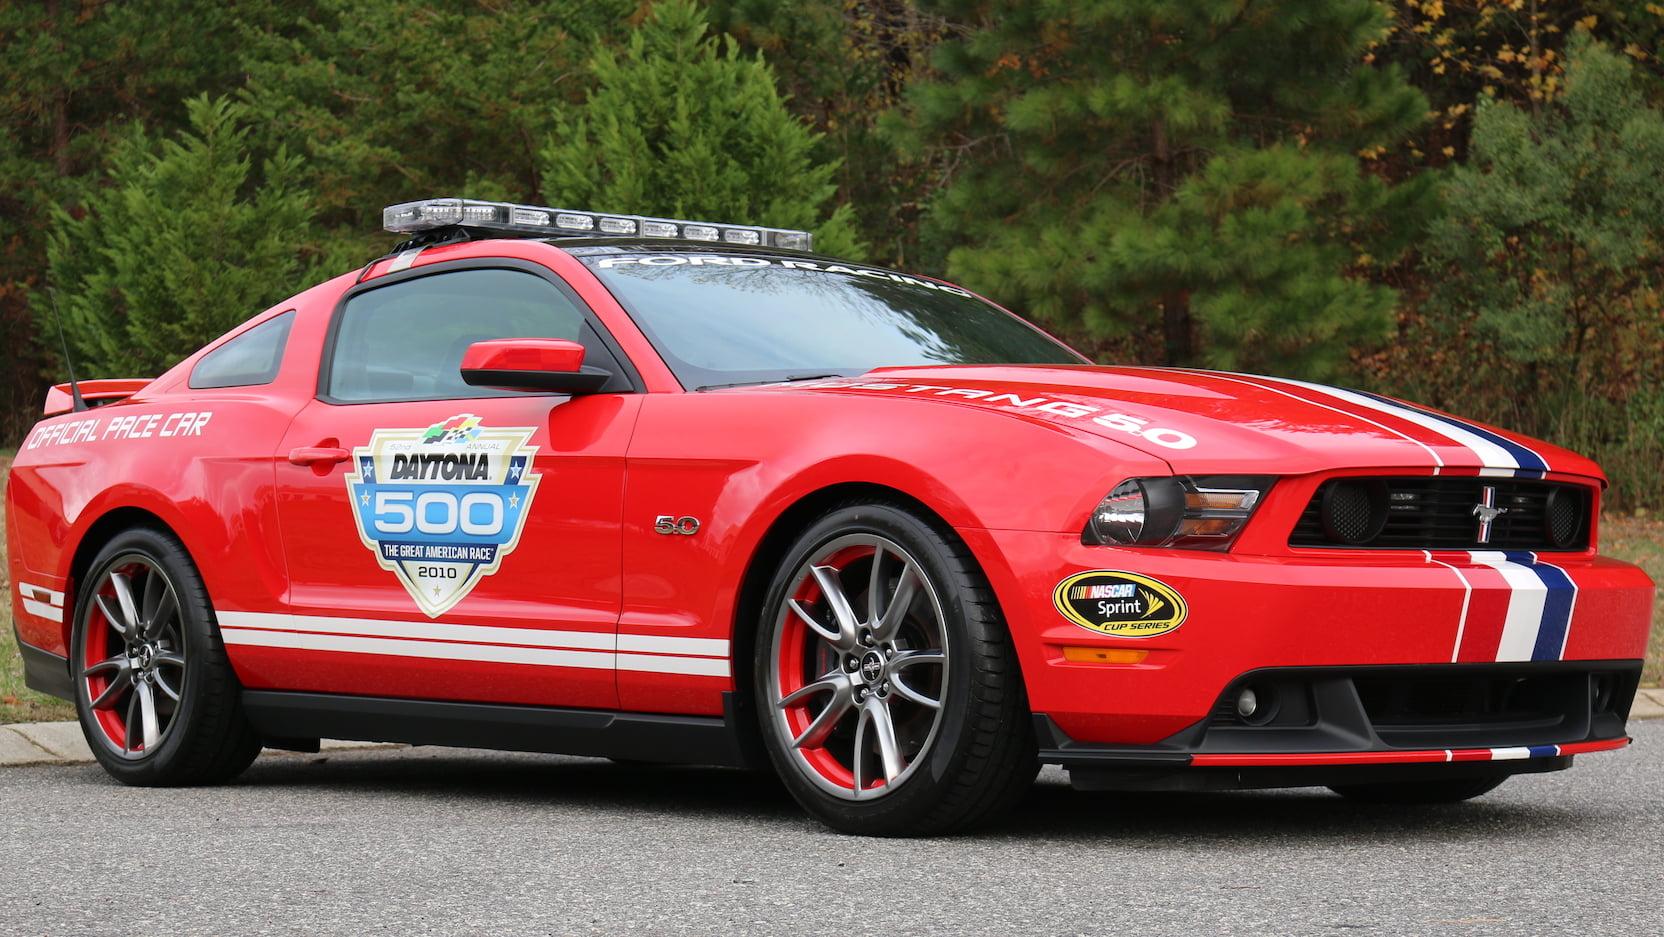 Mustang Of The Day: 2011 Ford Mustang GT Pace Cars